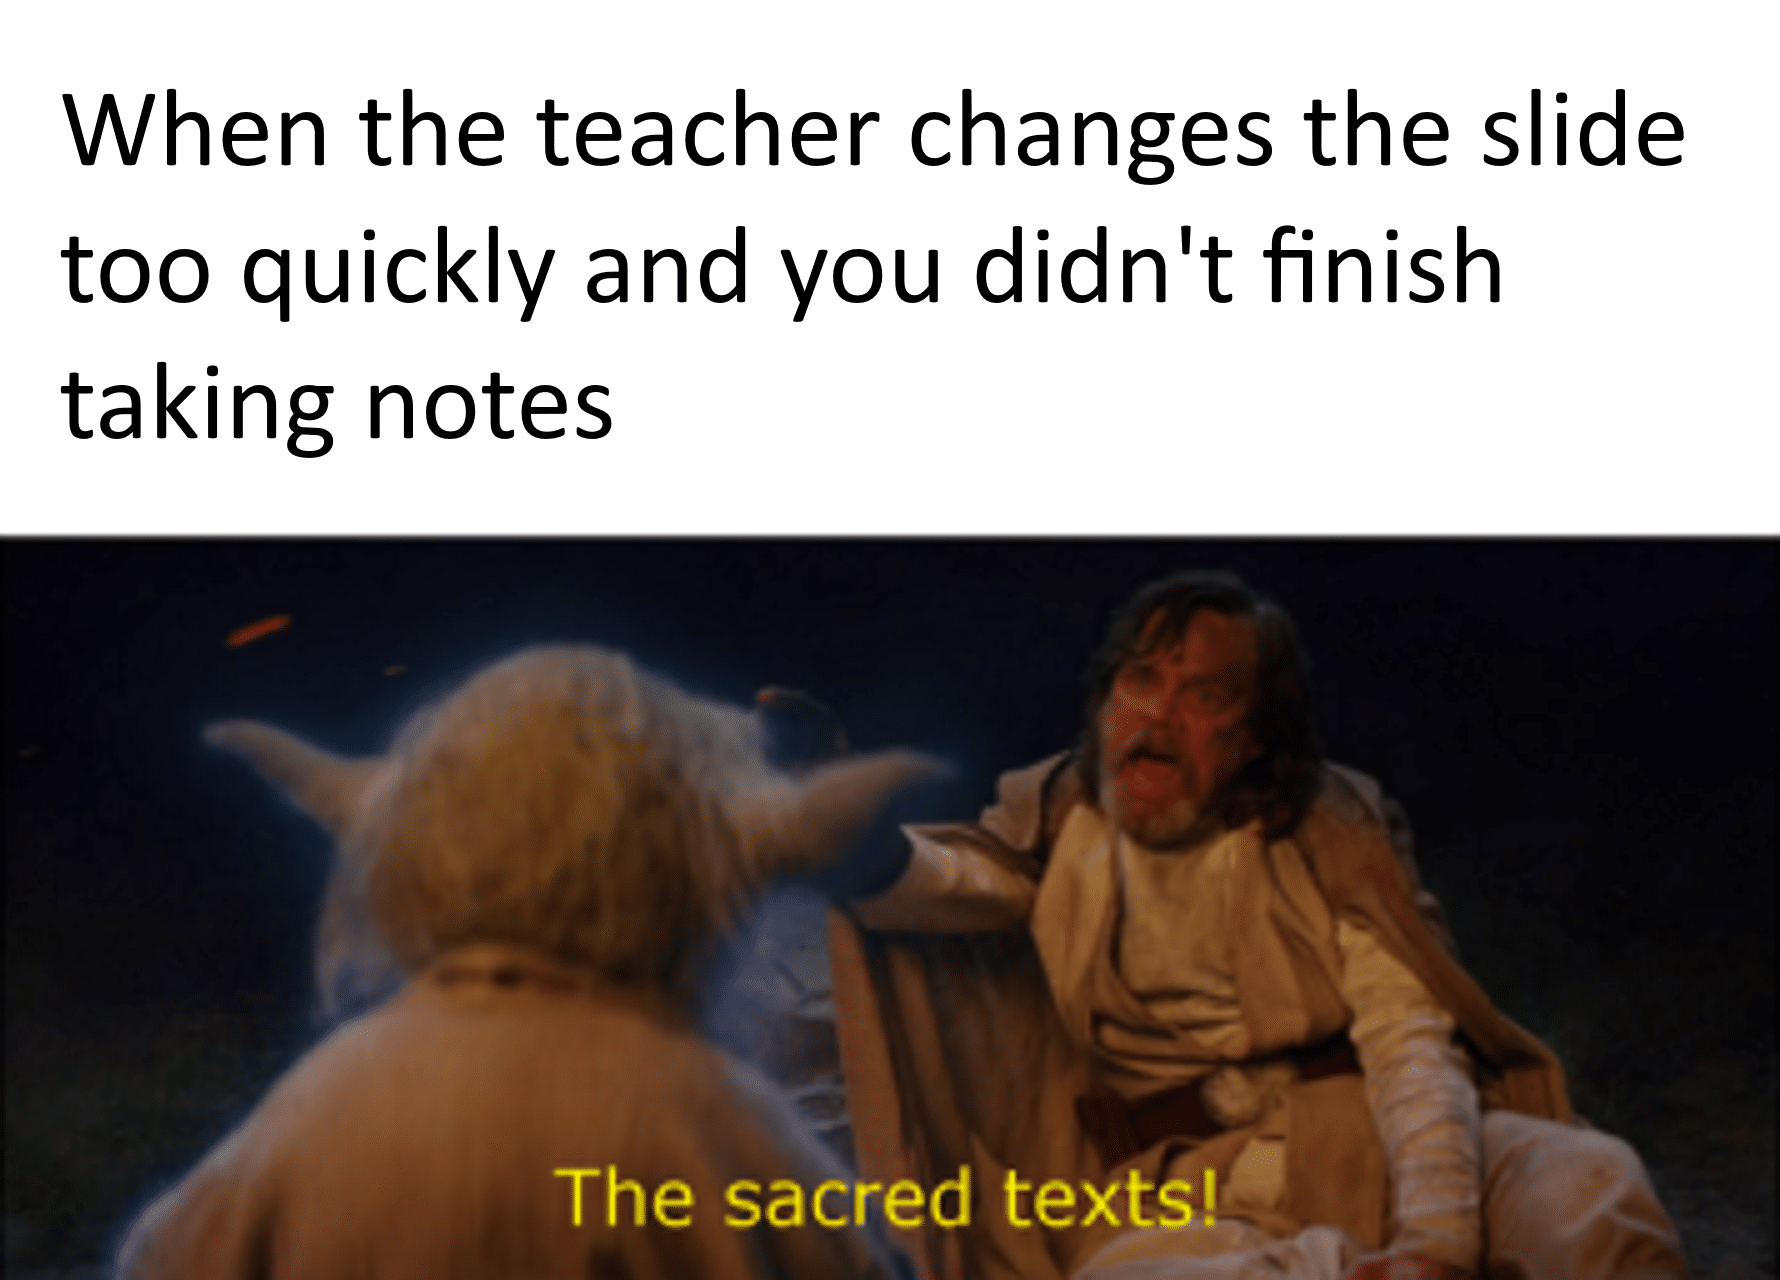 sequel-memes star-wars-memes sequel-memes text: When the teacher changes the slide too quickly and you didn't finish taking notes The sacred texts! 